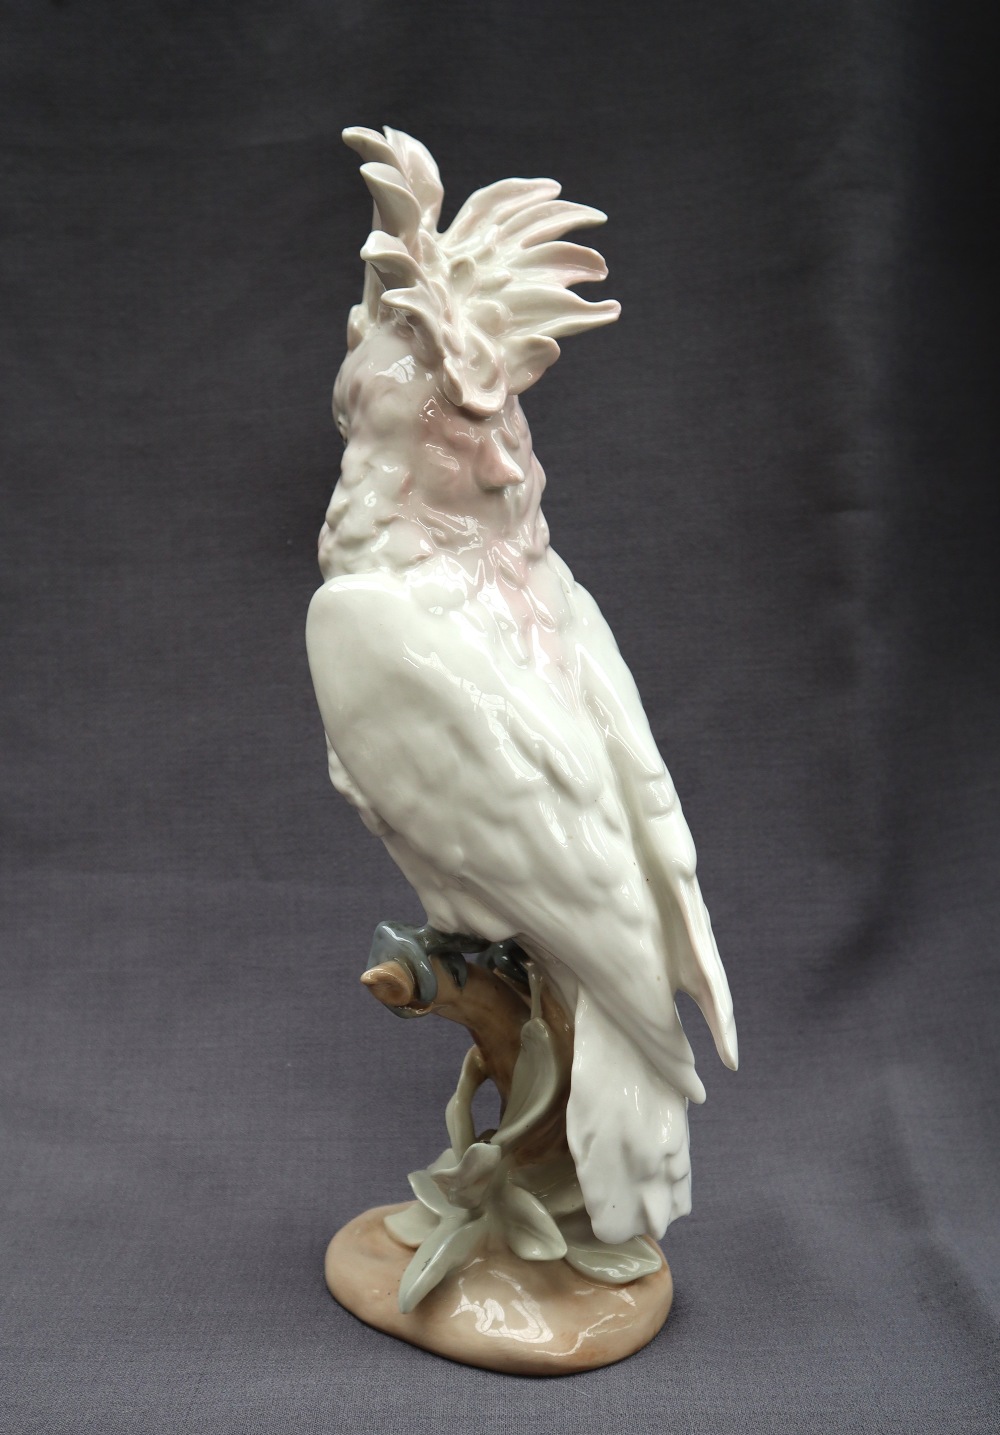 A Royal Dux porcelain figure of a cockatoo perched on a branch with leaves and an oval base, - Image 3 of 5